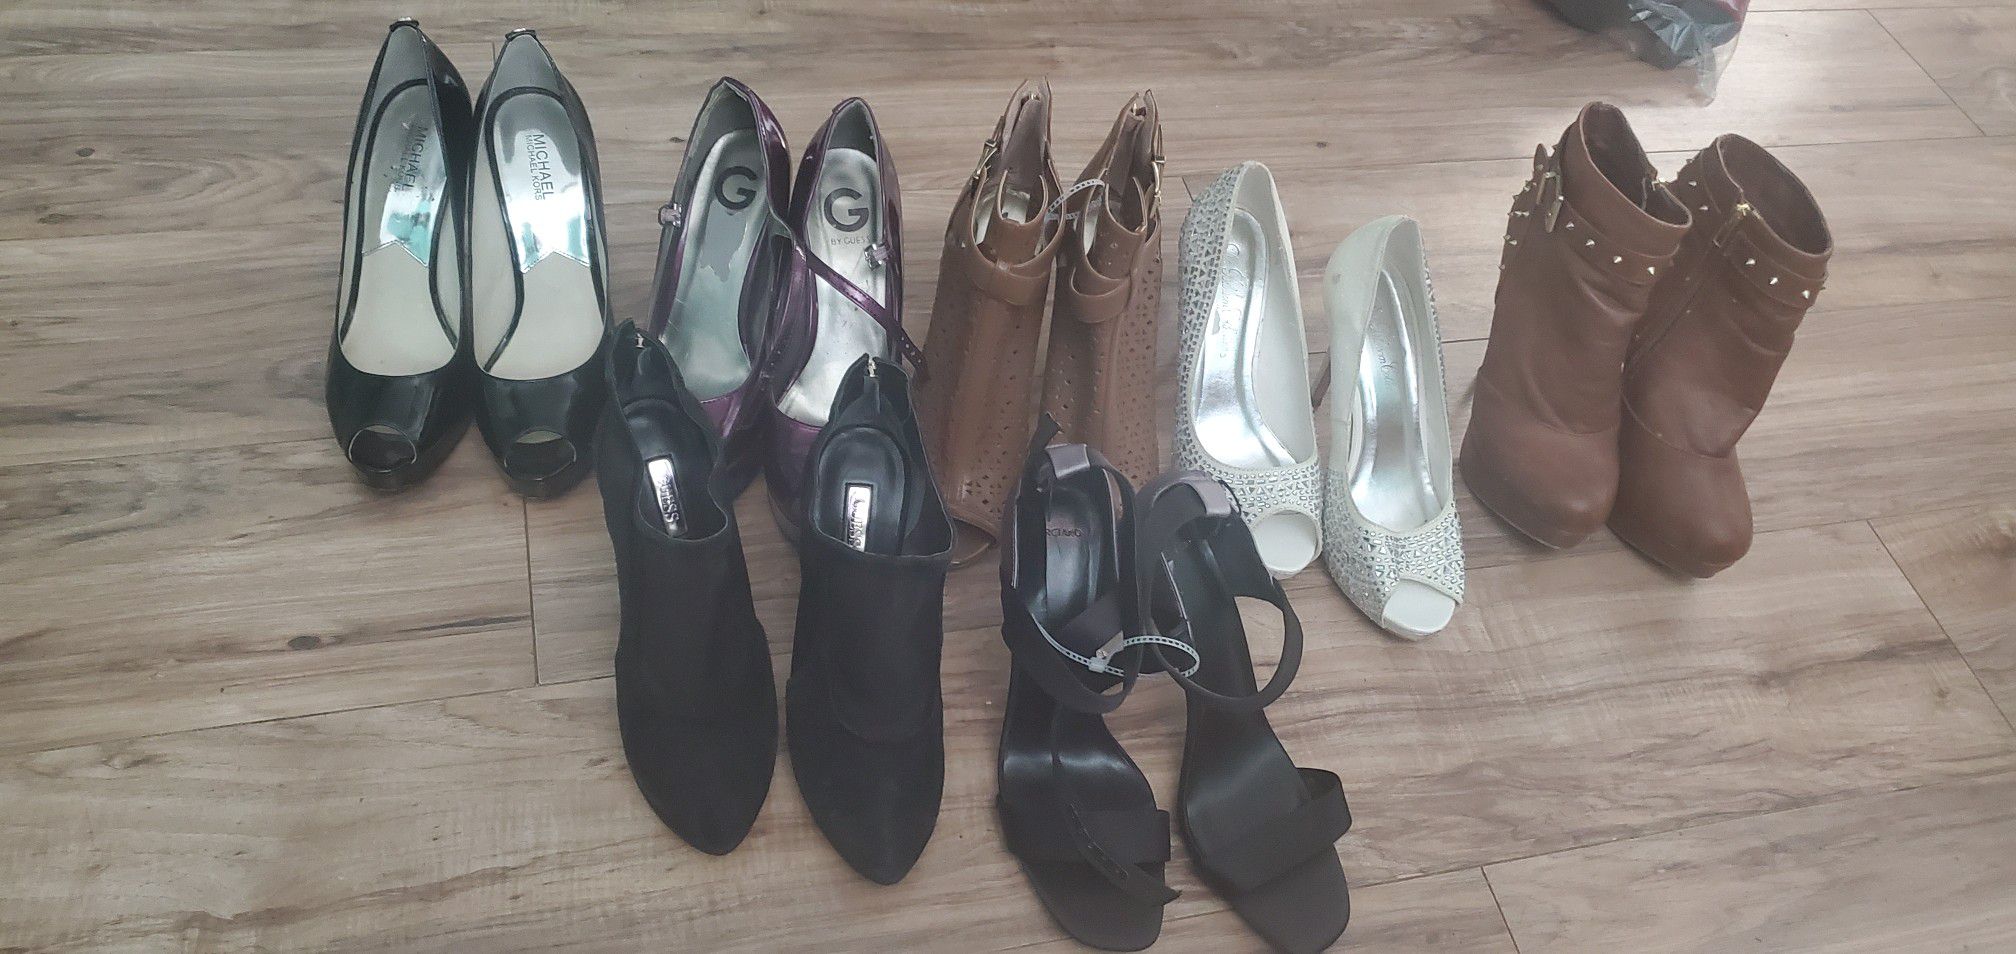 high heels 4 size 10 2 size 9 and 1 size 11